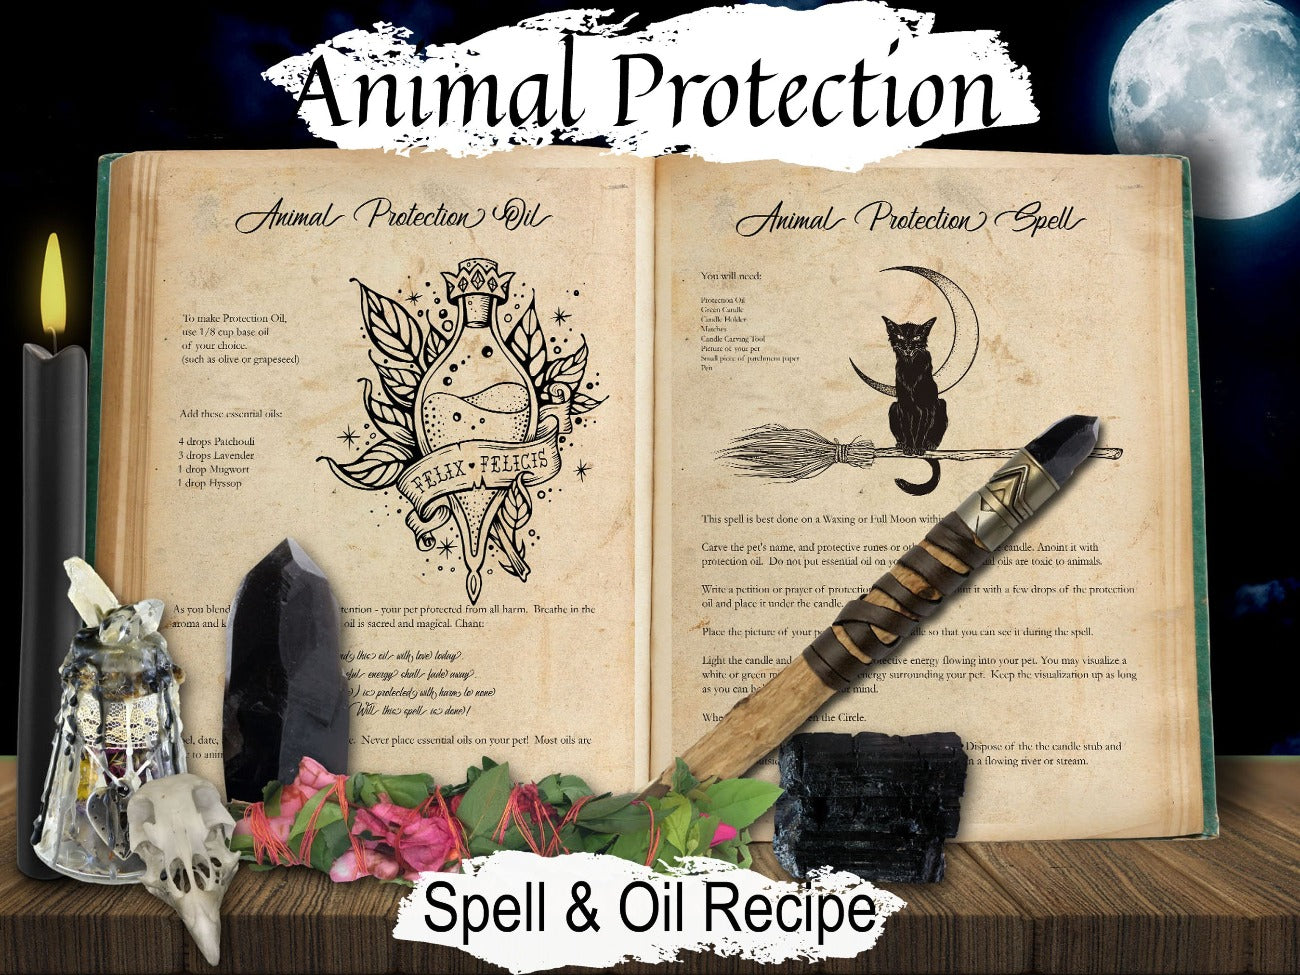 PET PROTECTION SPELL, Protection Magic Spell for Furbabies, Protect a Pet, Wicca Witchcraft Animal Protection Charm, Pet Good Luck Charm - Morgana Magick Spell